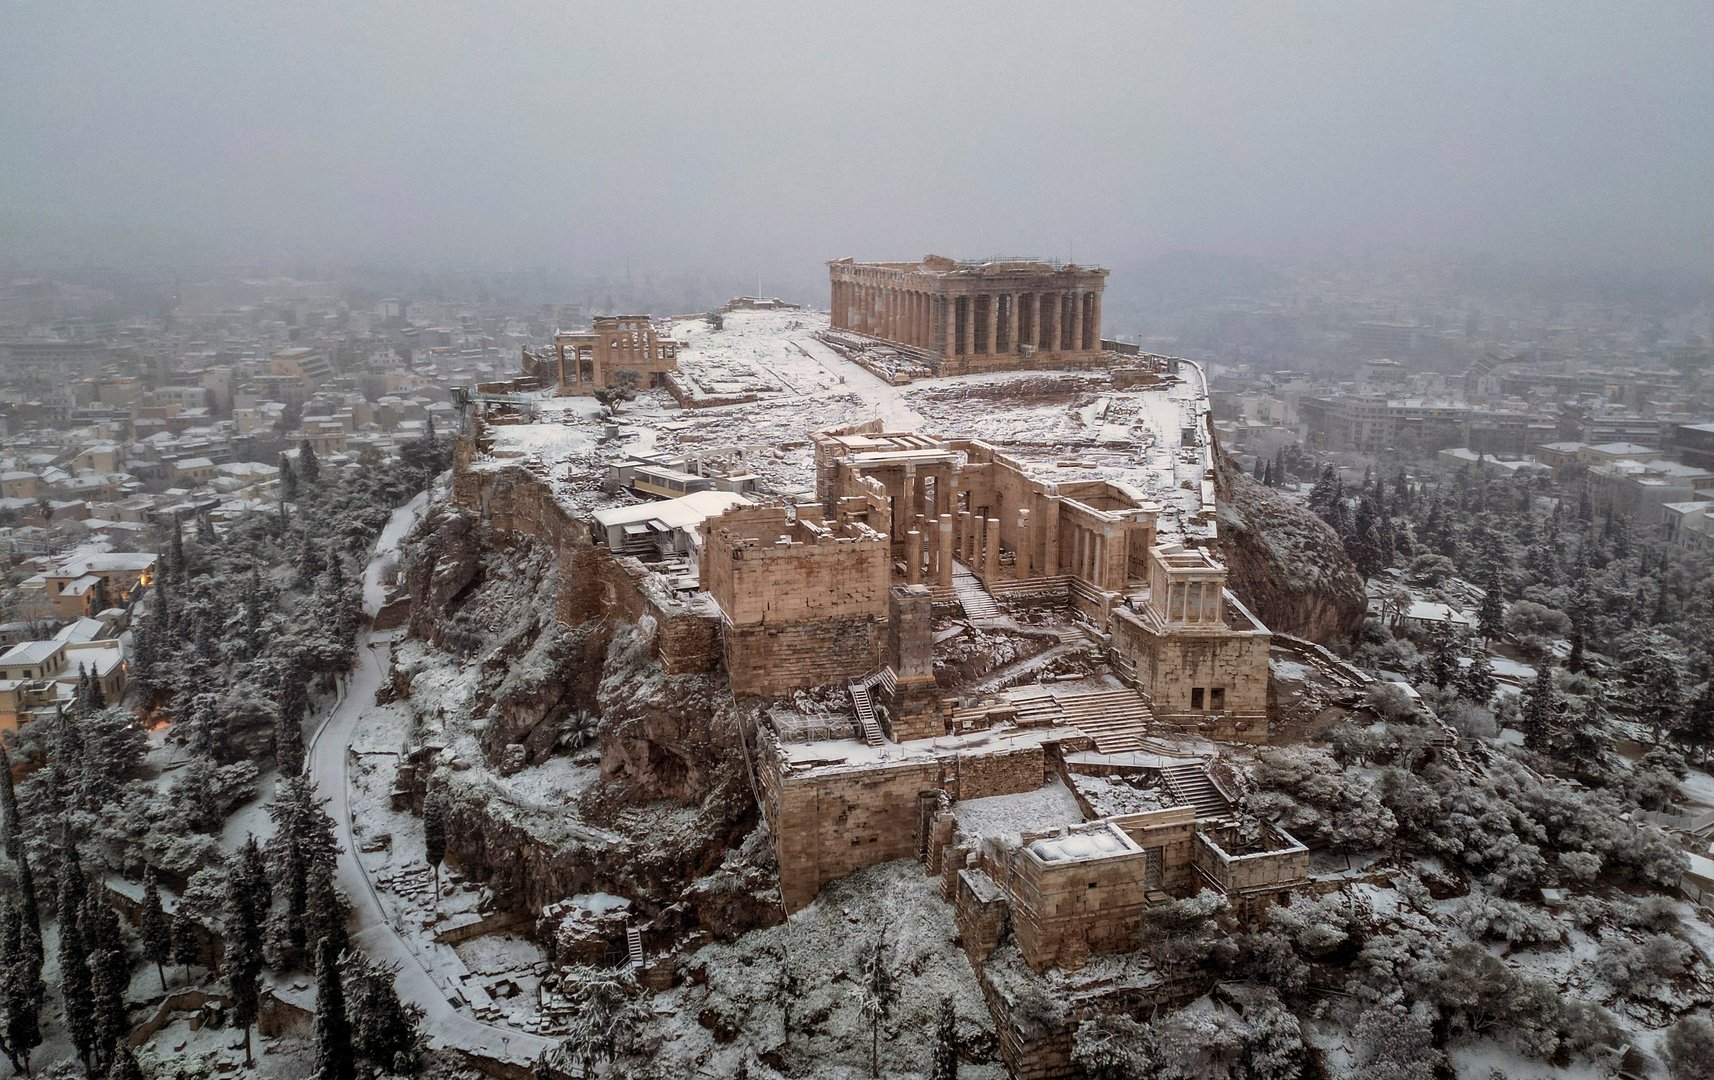 image Snowstorm shuts schools and shops, disrupts traffic in Athens